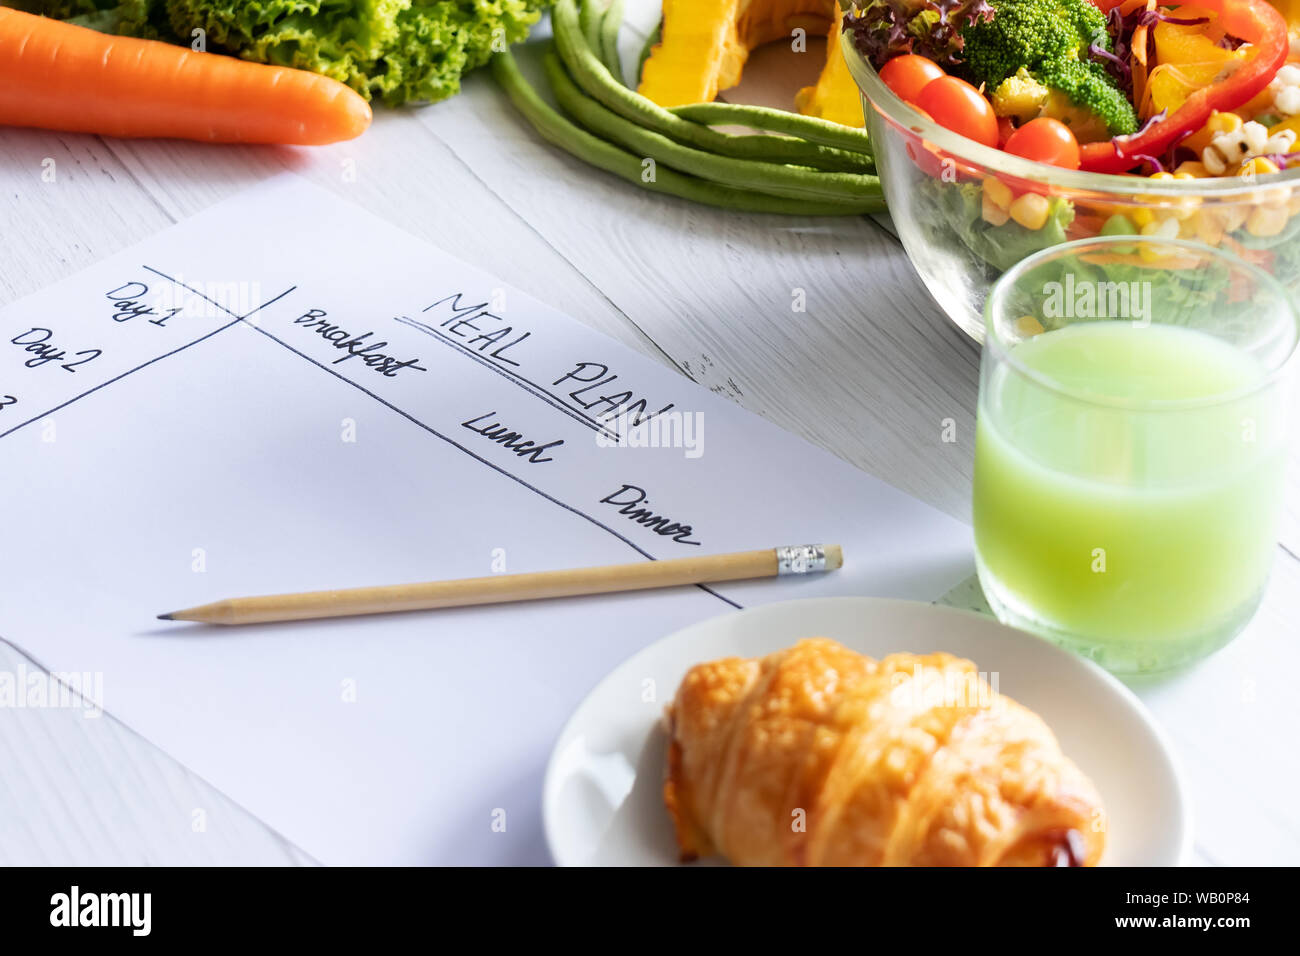 Calories control, meal plan, food diet and weight loss concept. top view of meal plan table on paper with salad, fruit juice, bread and vegetable Stock Photo